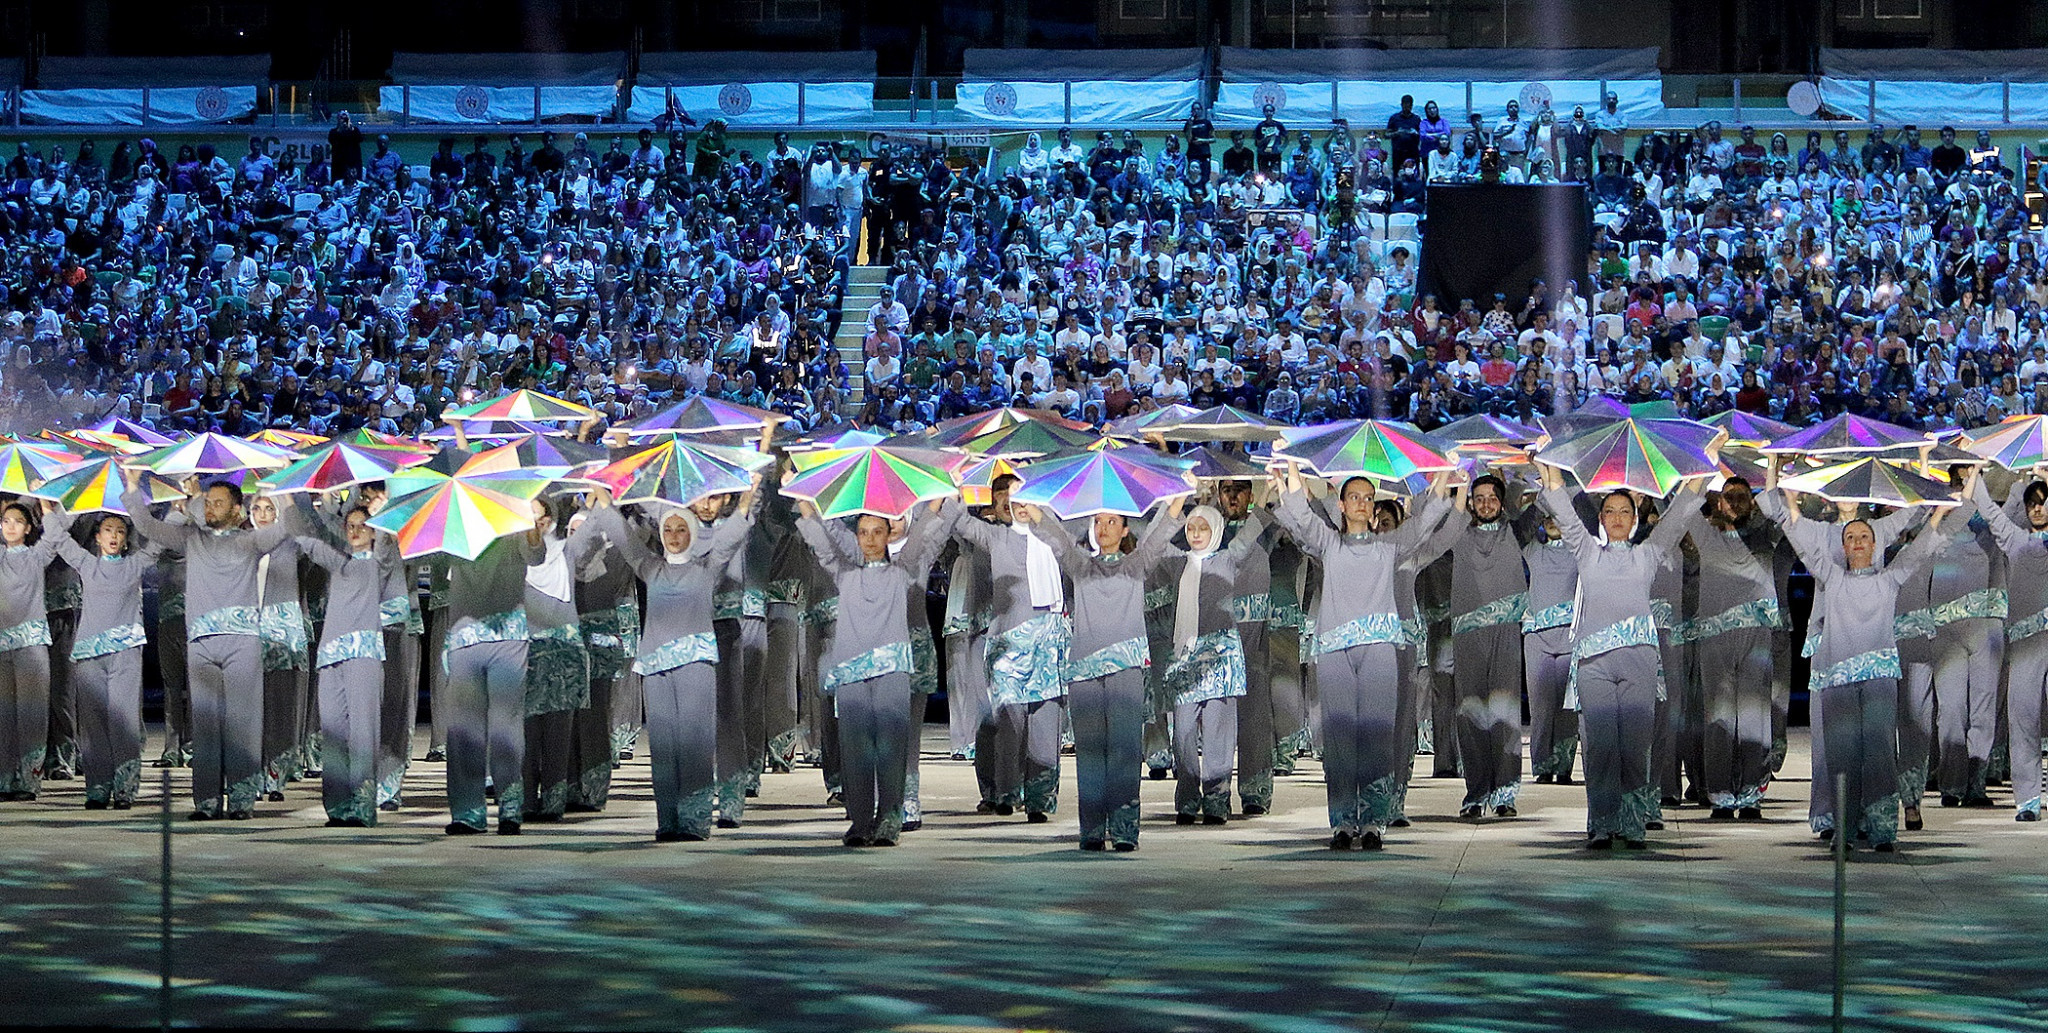 Performers hold up multi-coloured umbrellas during the start of the showpiece event ©Konya 2021